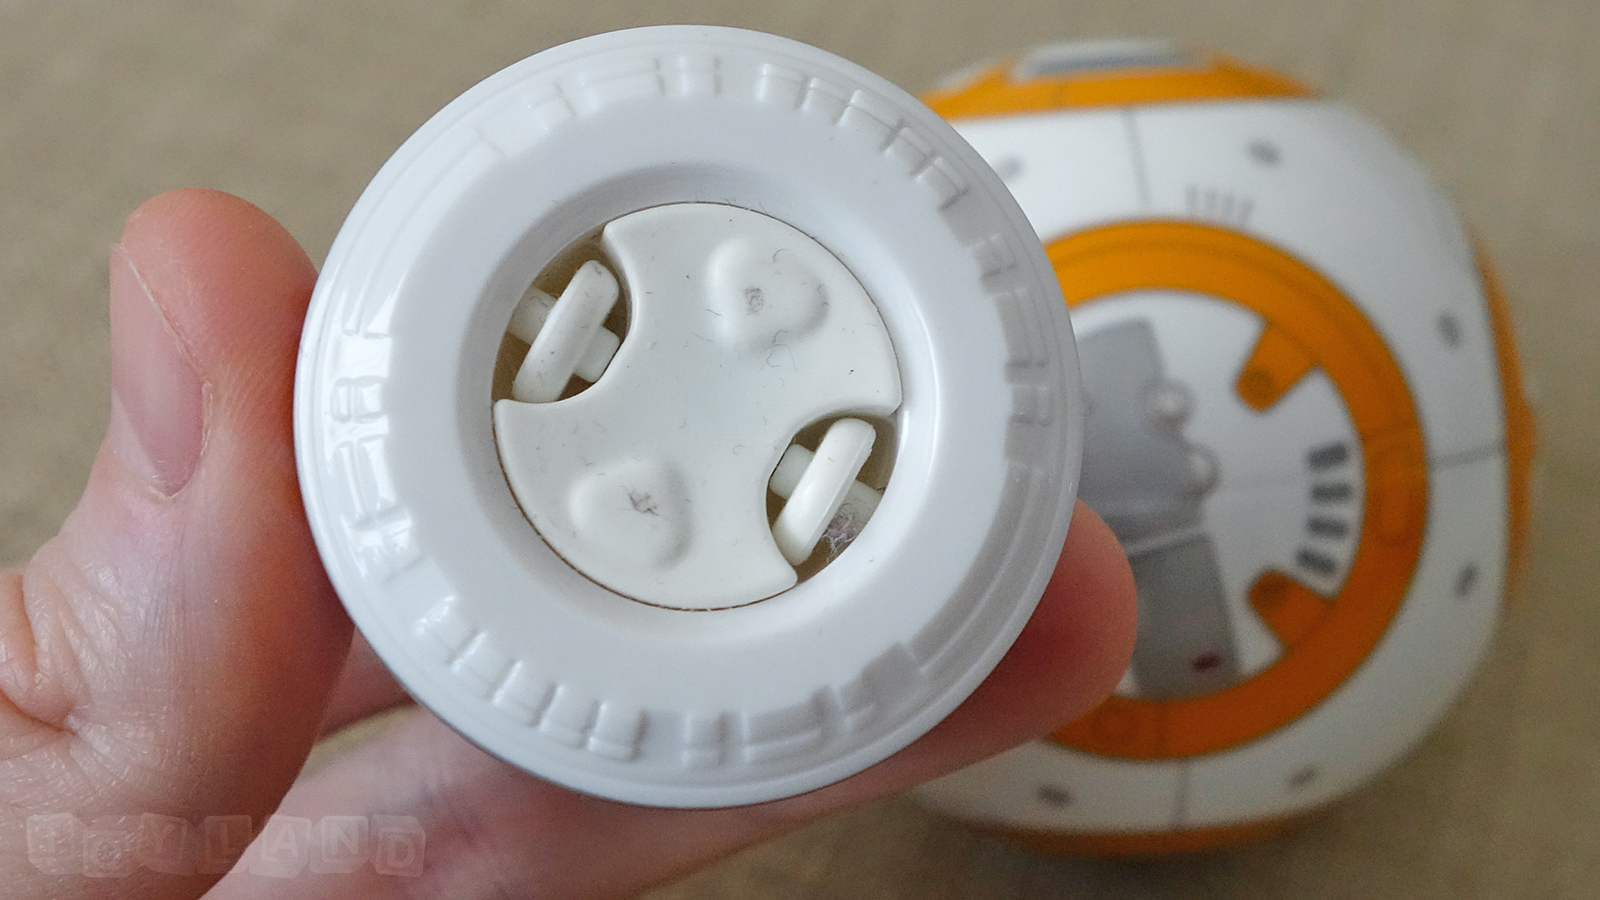 Sphero BB-8 Review: This Is The Coolest Star Wars Toy Ever